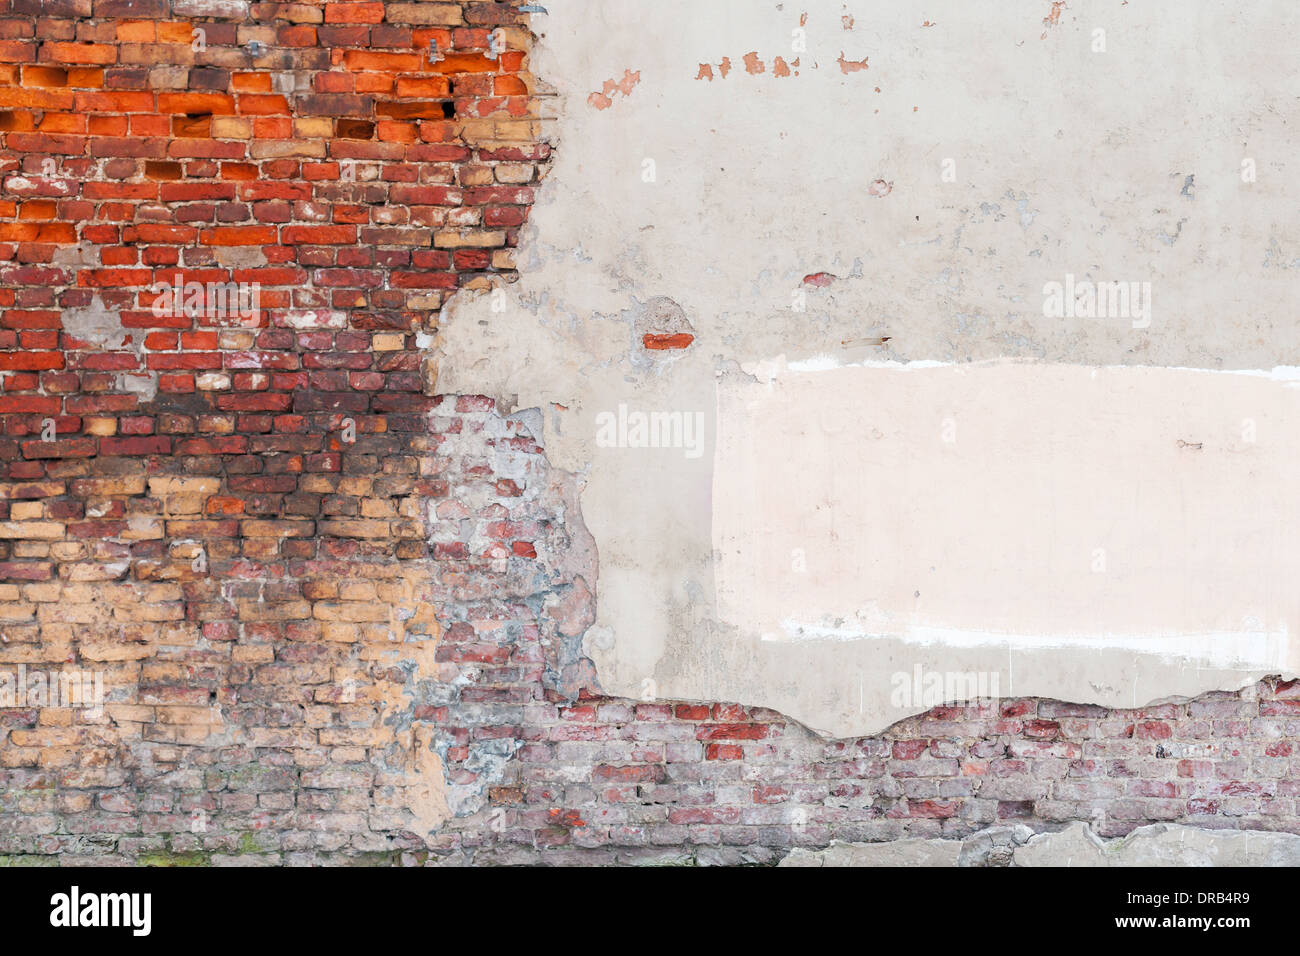 Old grunge wall background texture with bricks and stucco Stock Photo